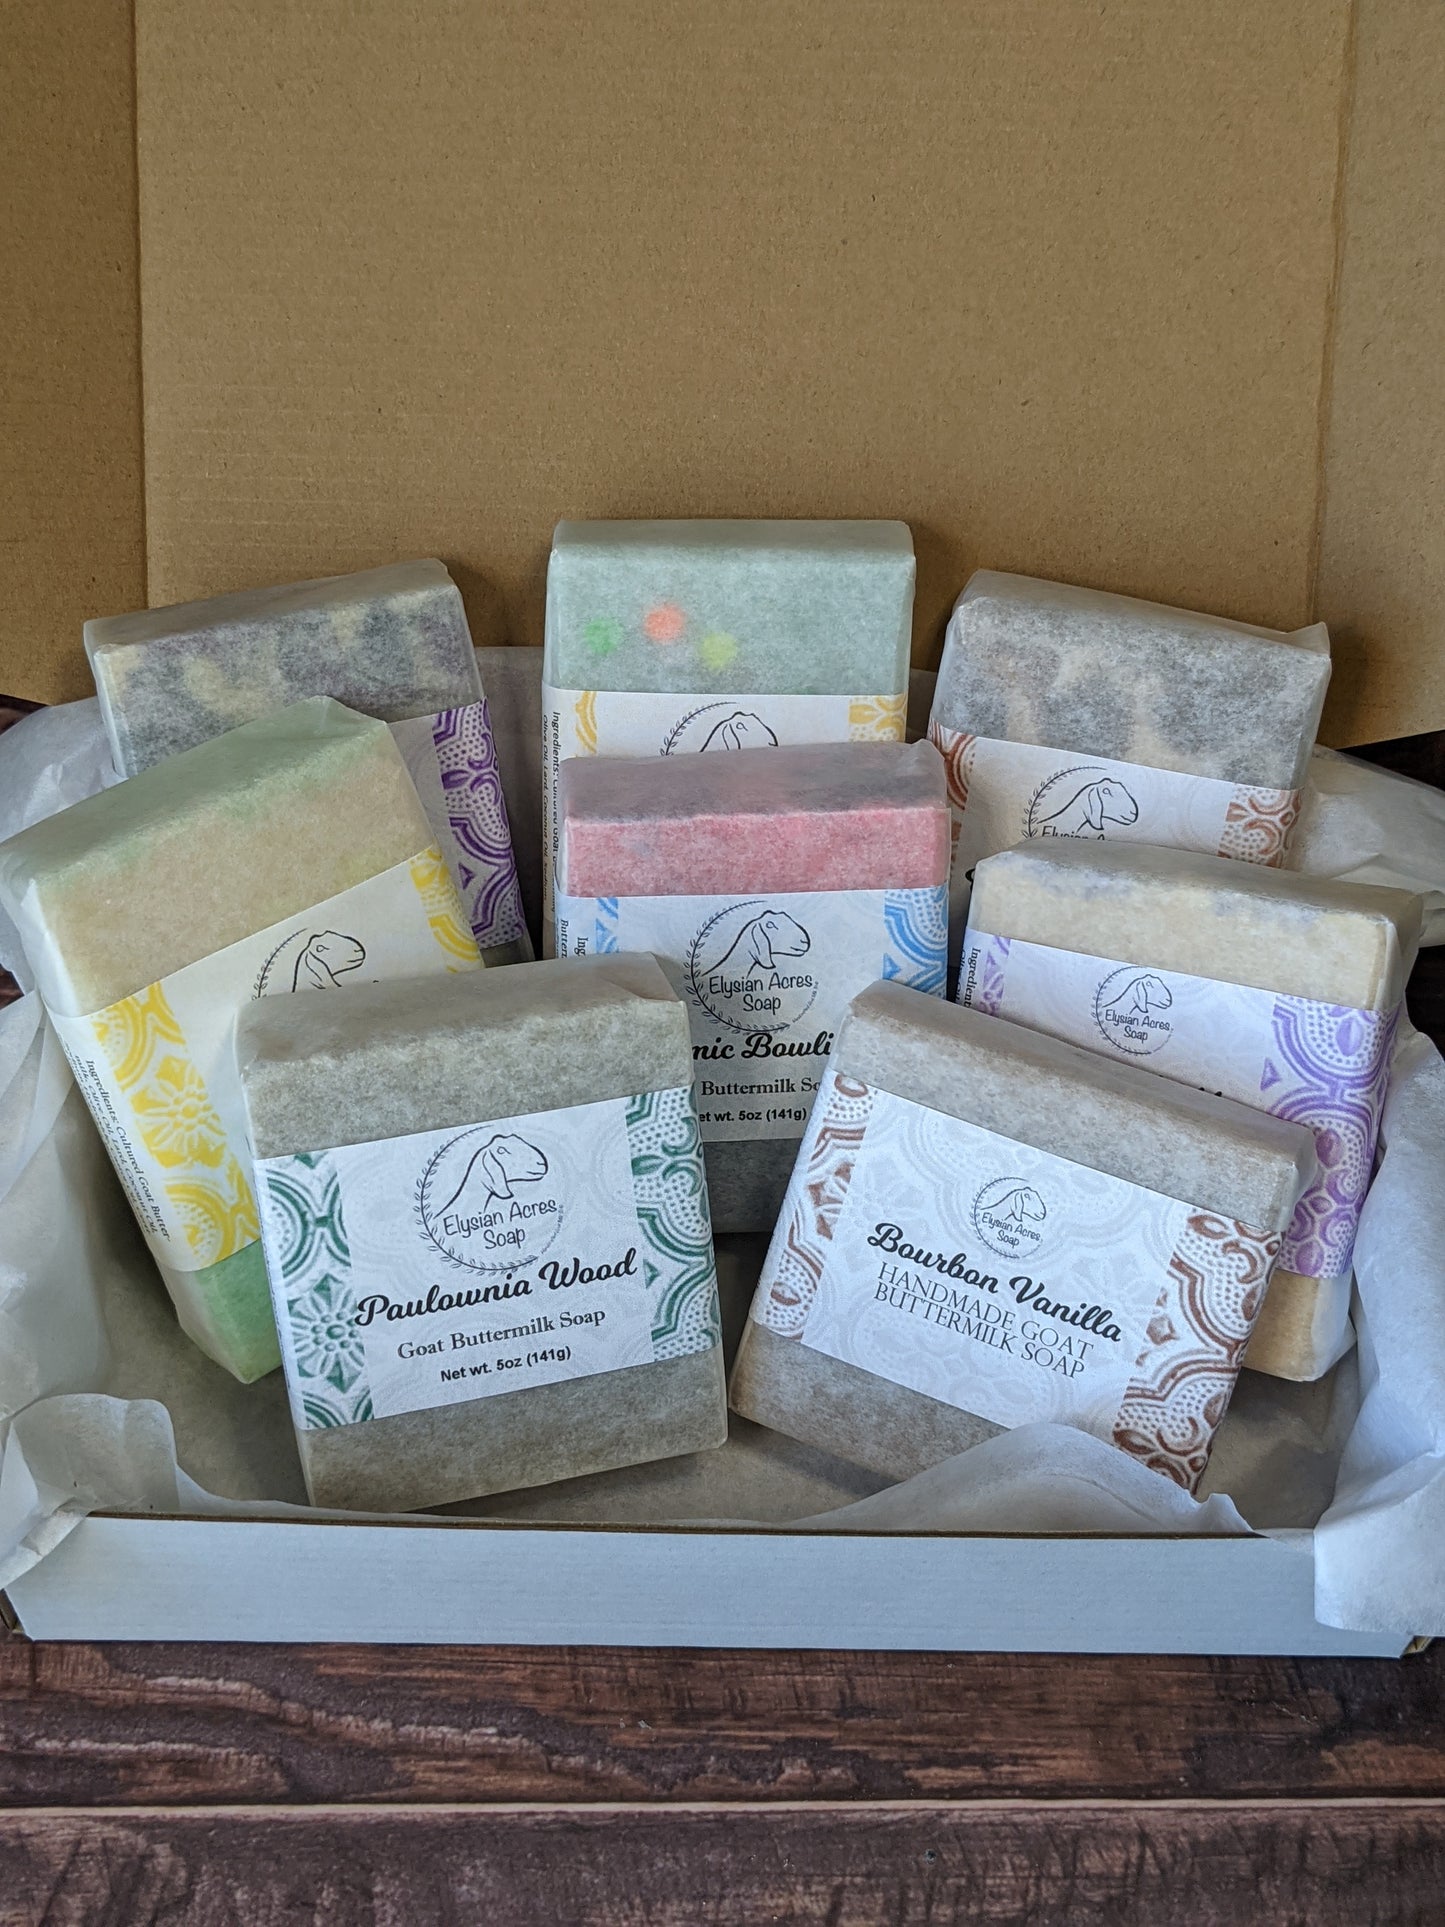 8 Bar Stock Up Box - An assortment of 8 full-size Goat Buttermilk Soaps - Ships Free!